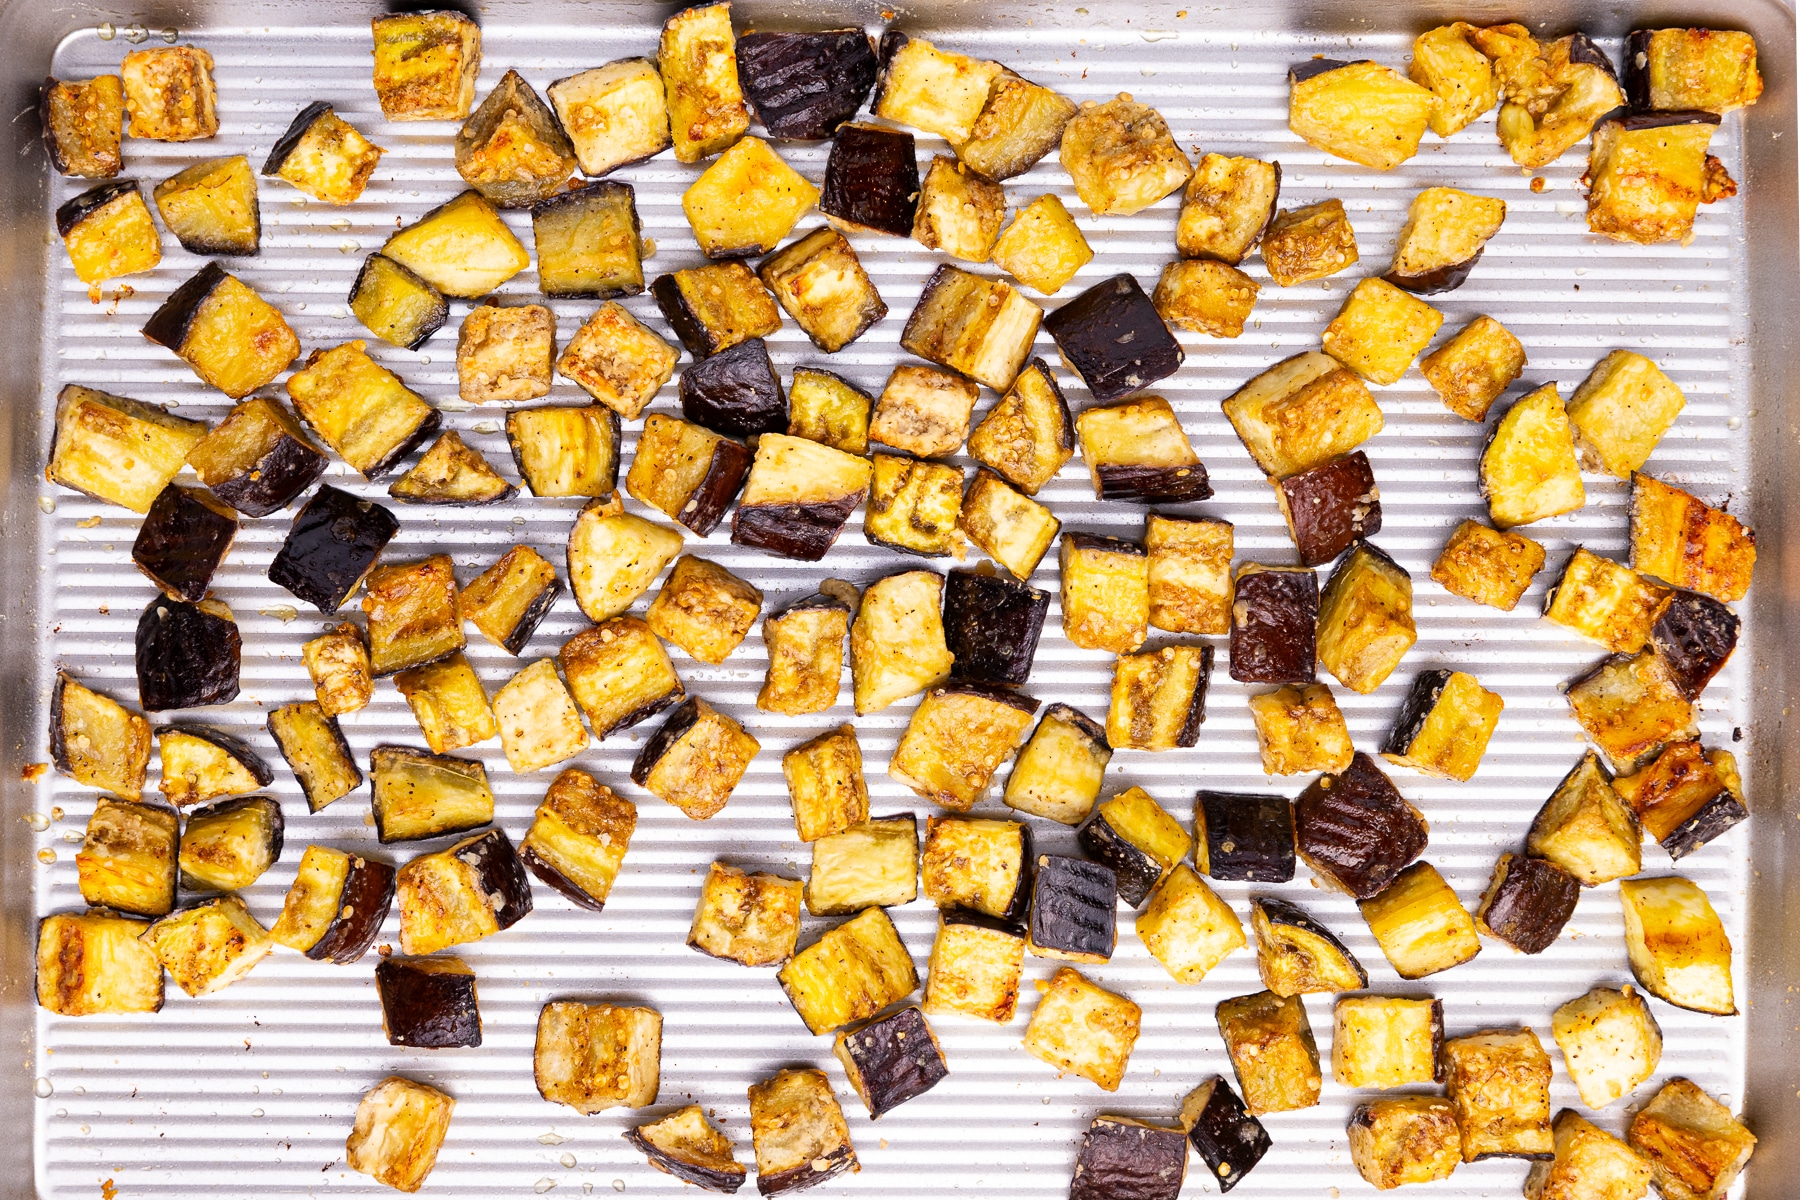 golden cubes of eggplant on a baking tray